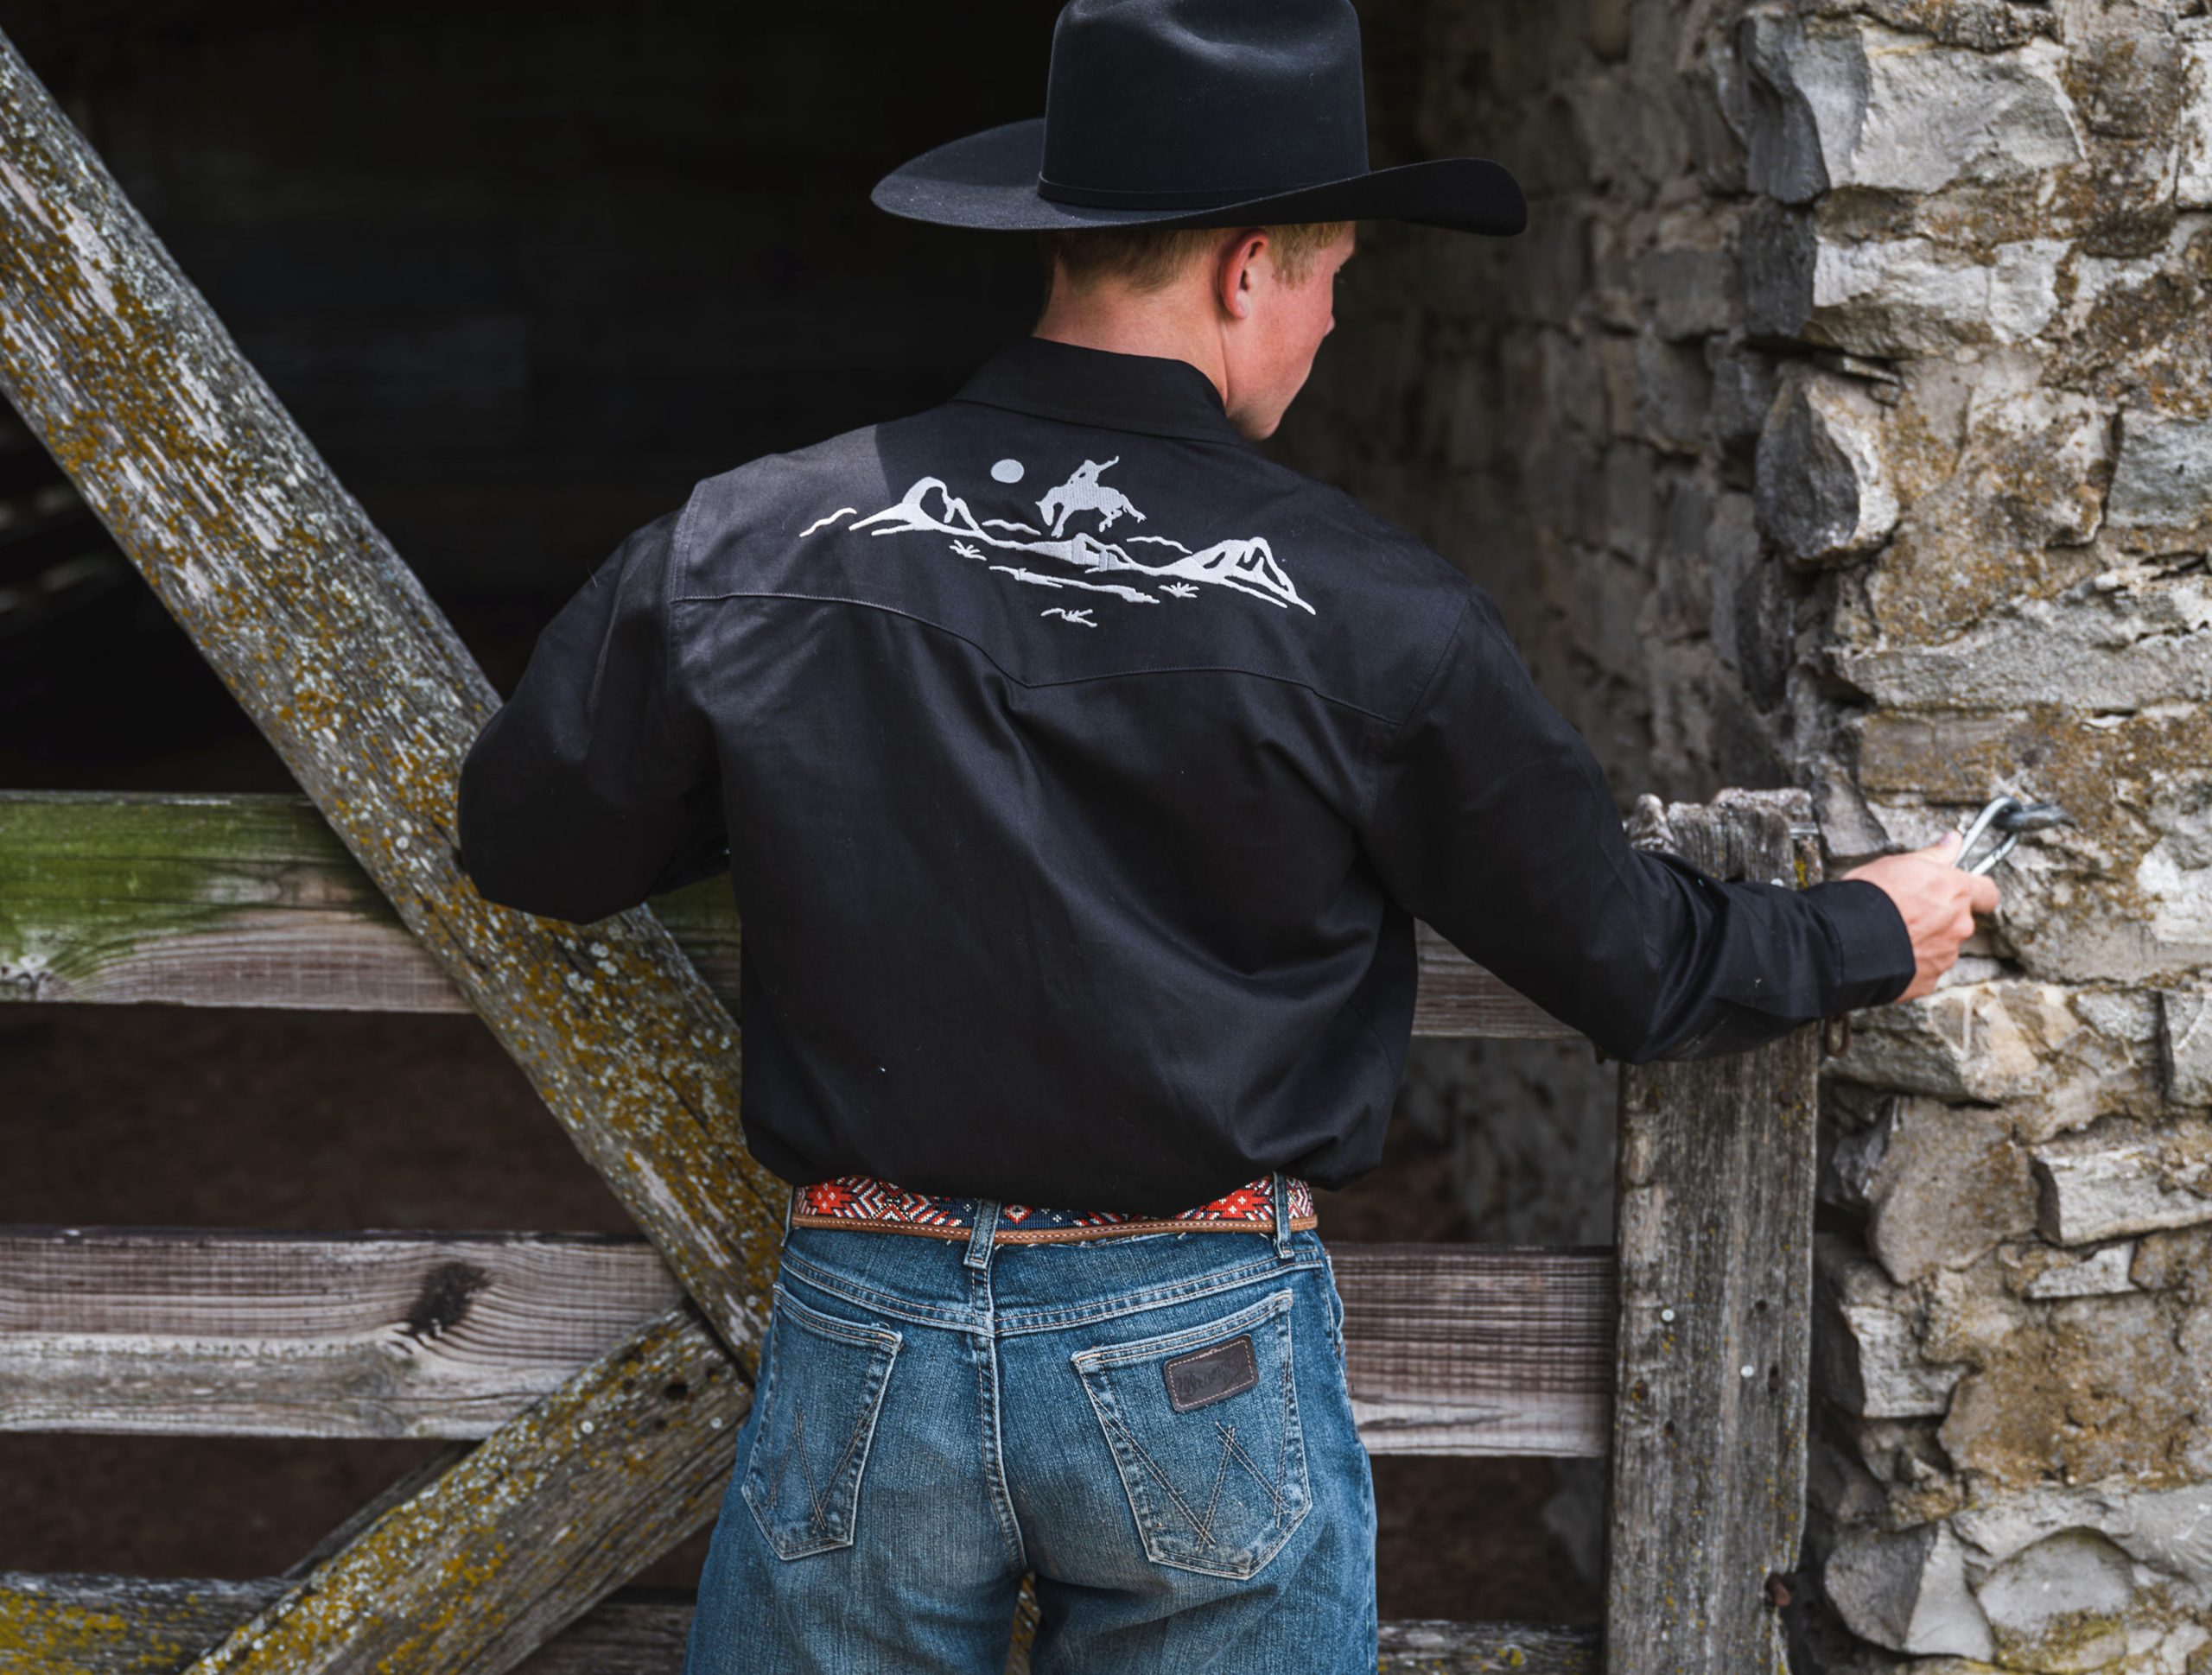 Dress Like A Dutton With The Wrangler x Yellowstone Collection